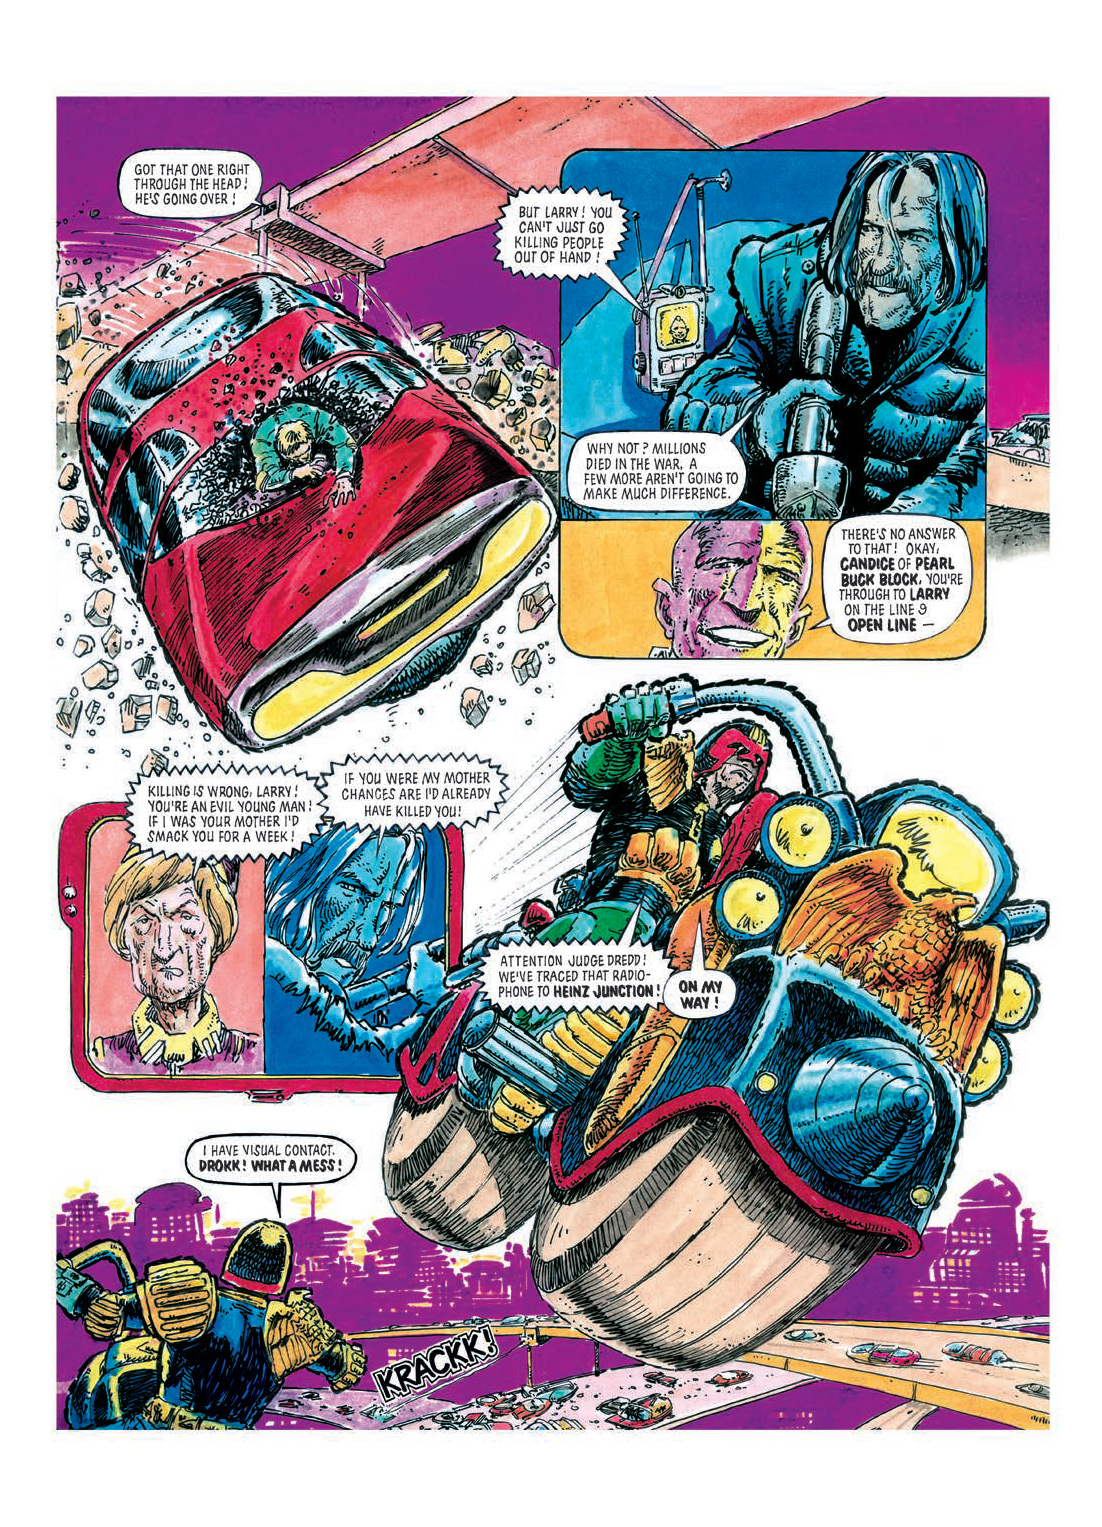 Read online Judge Dredd: The Restricted Files comic -  Issue # TPB 1 - 201